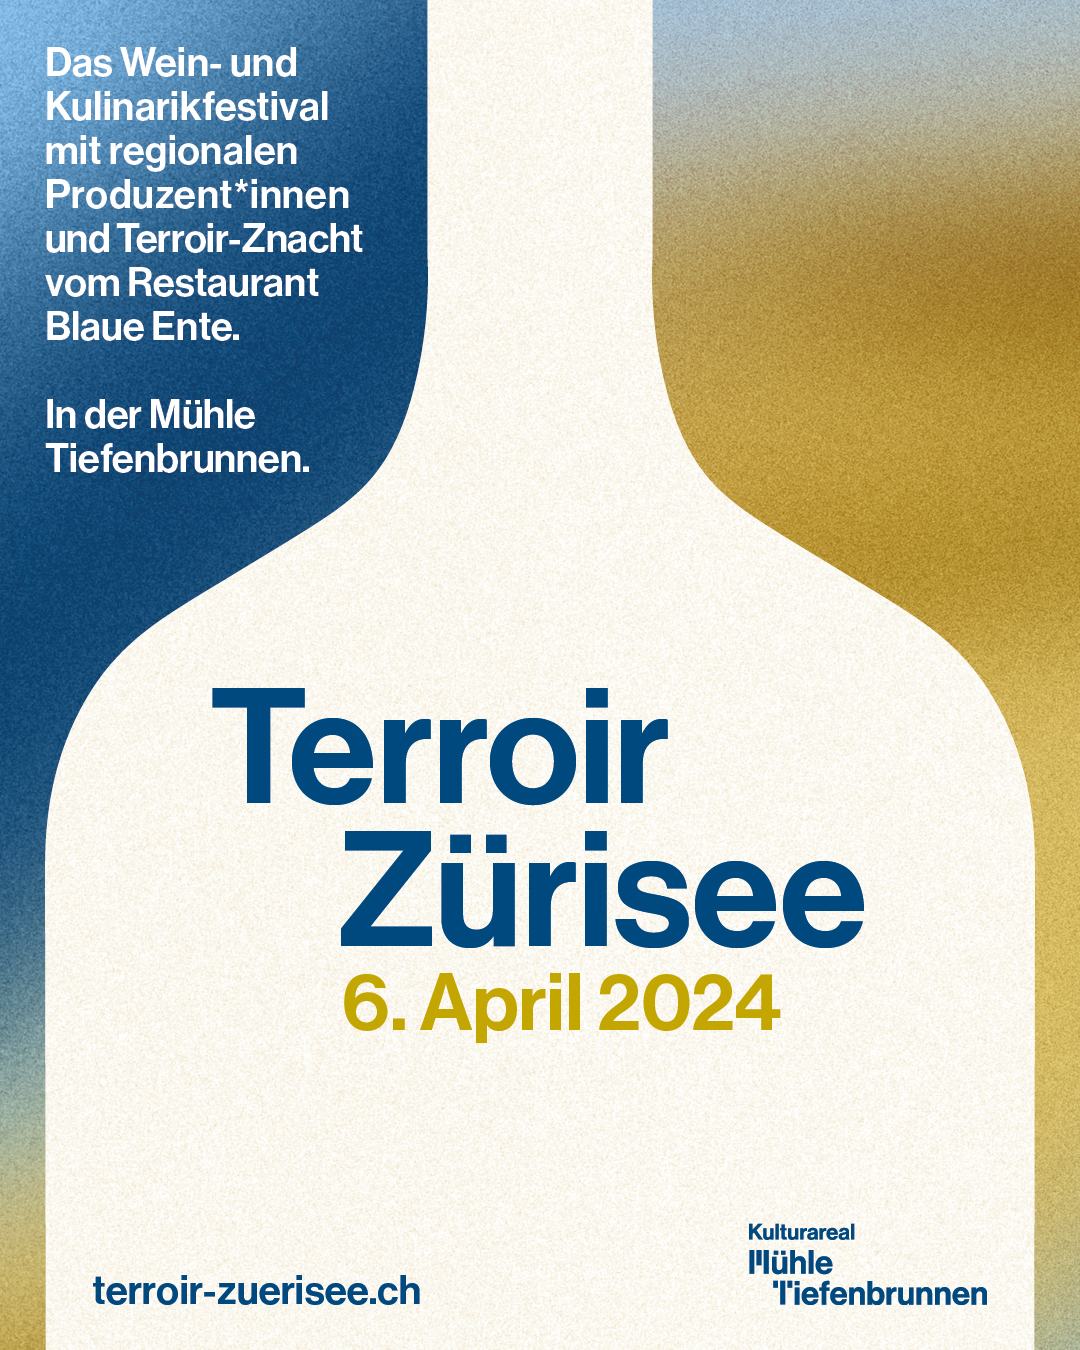 Terroir Zürisee, the wine and culinary festival in the Mühle Tiefenbrunnen on April 6 Poster